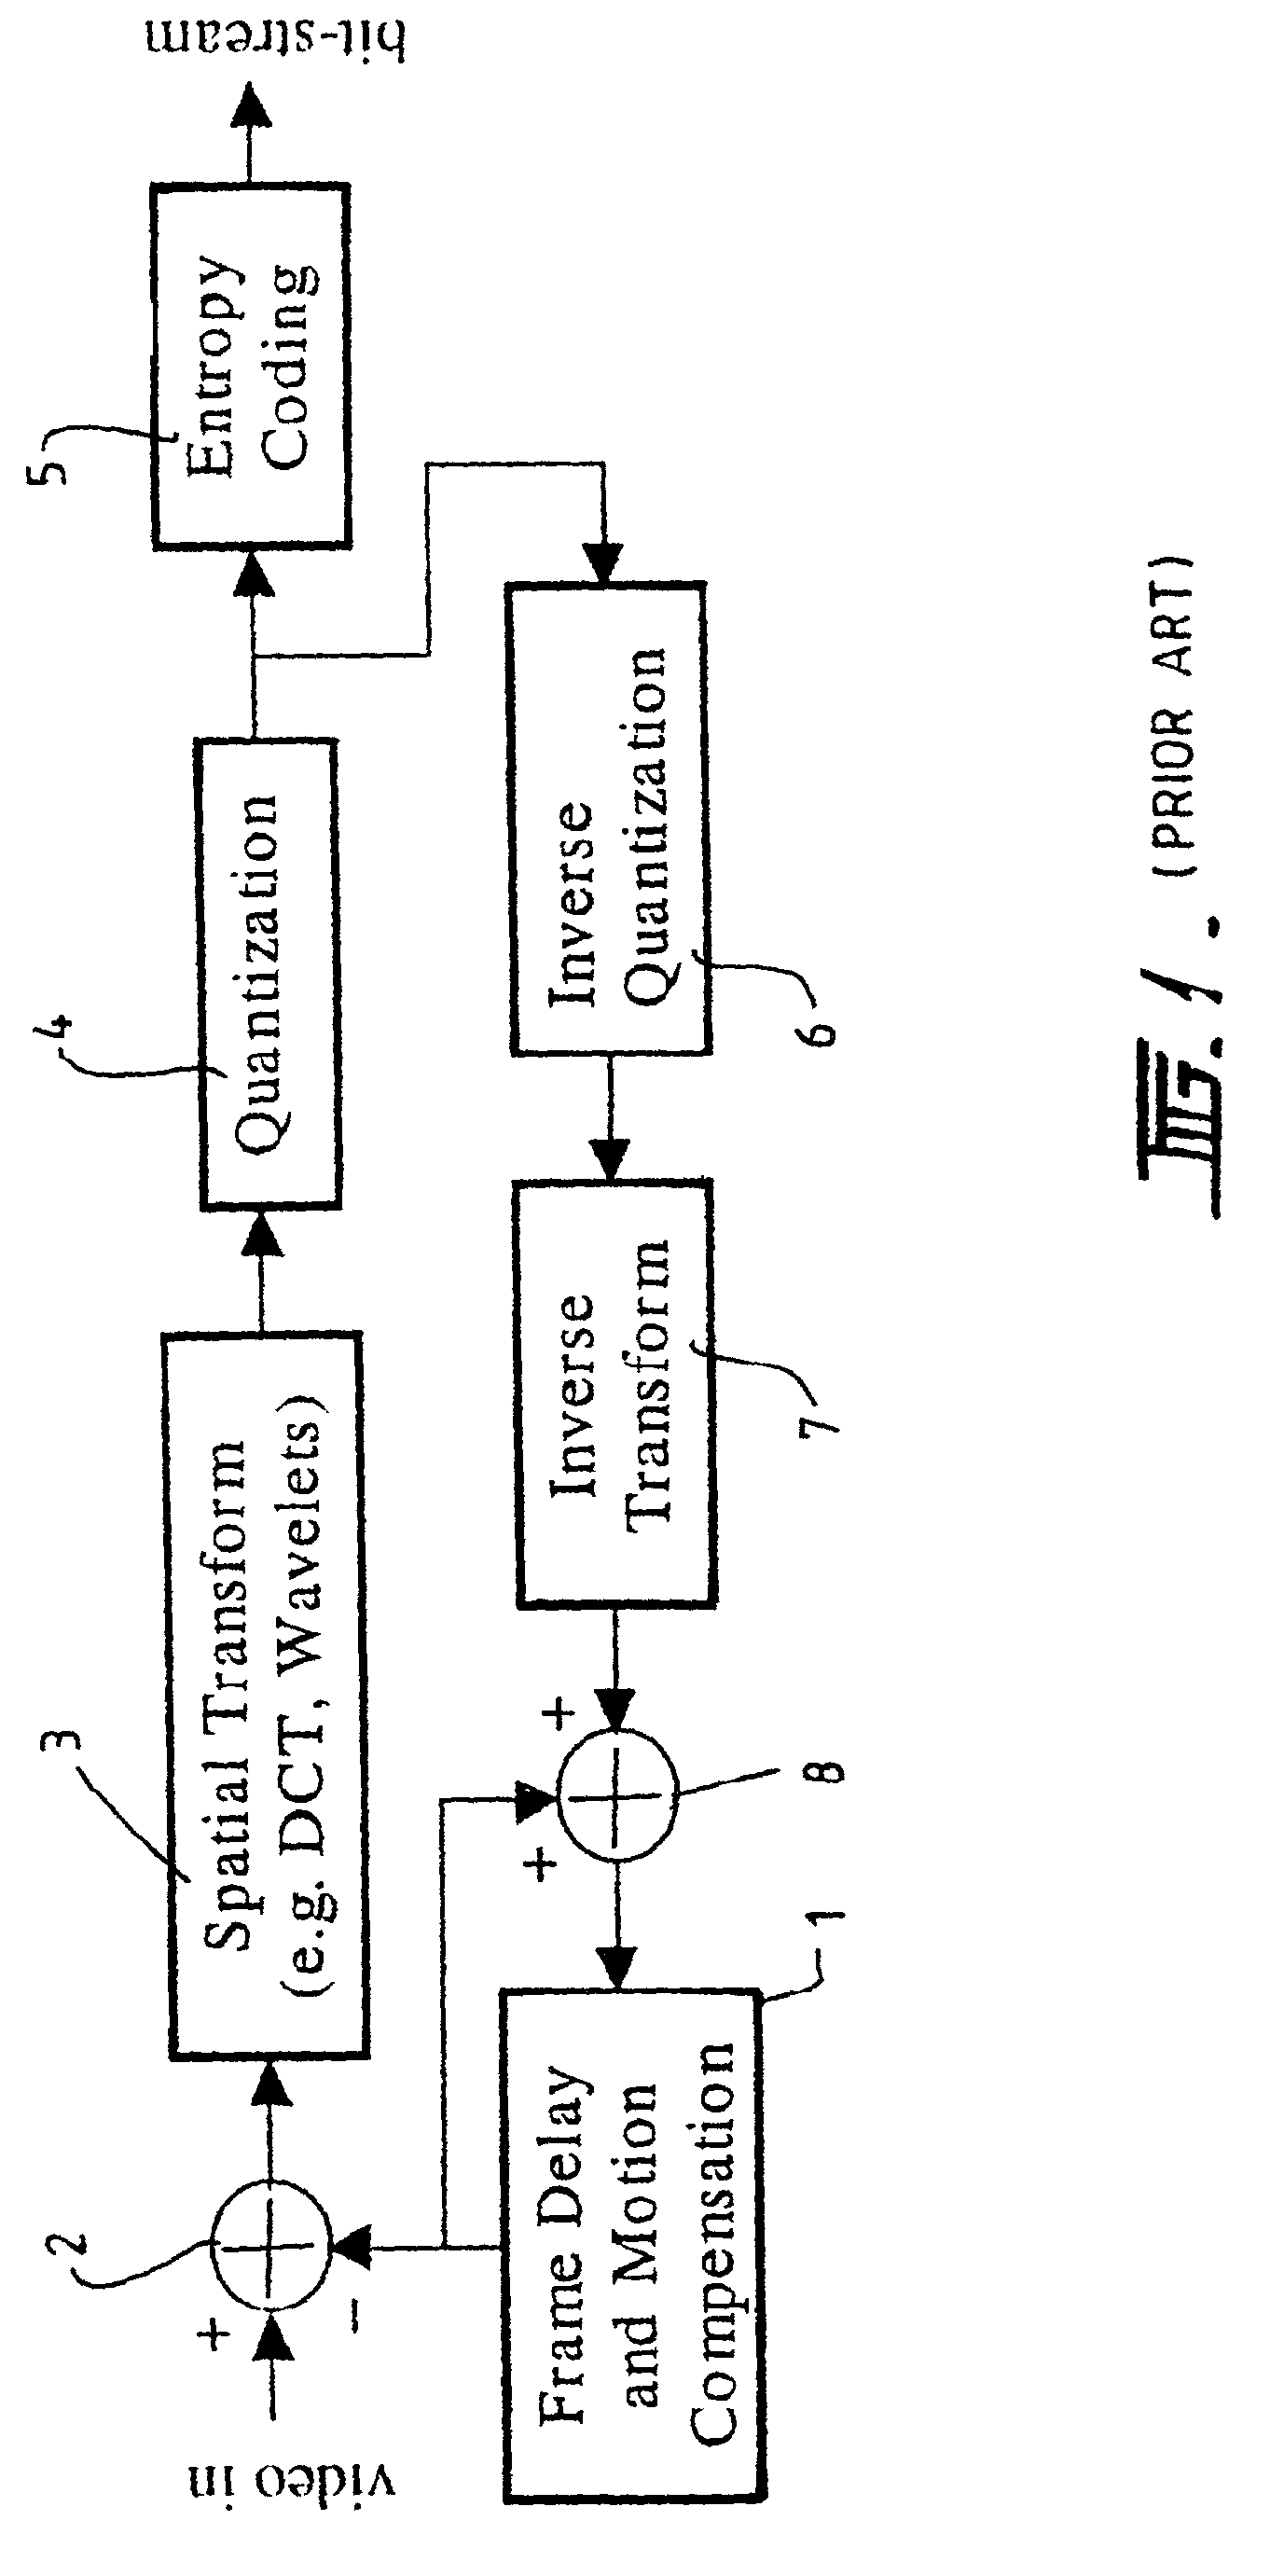 Method and apparatus for scalable compression of video